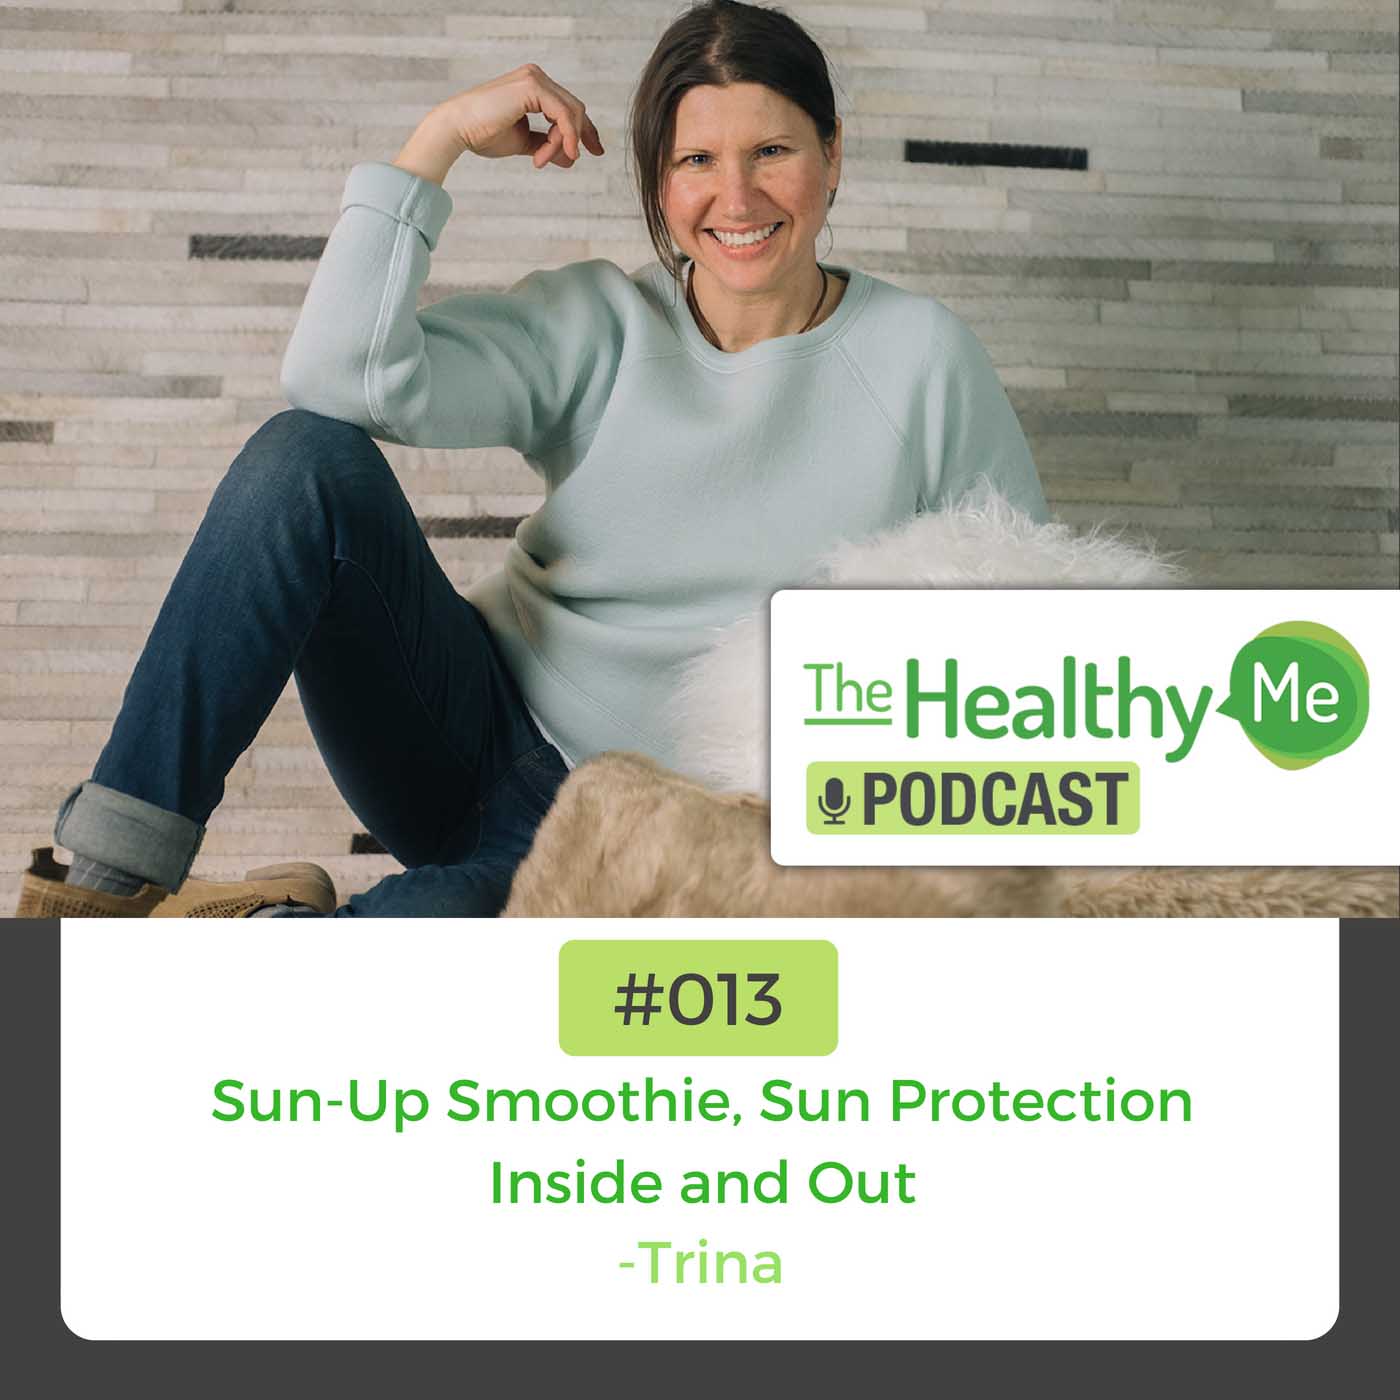 Detox Suggestion for Aluminum from Antiperspirants | The Healthy Me Podcast Episode 013